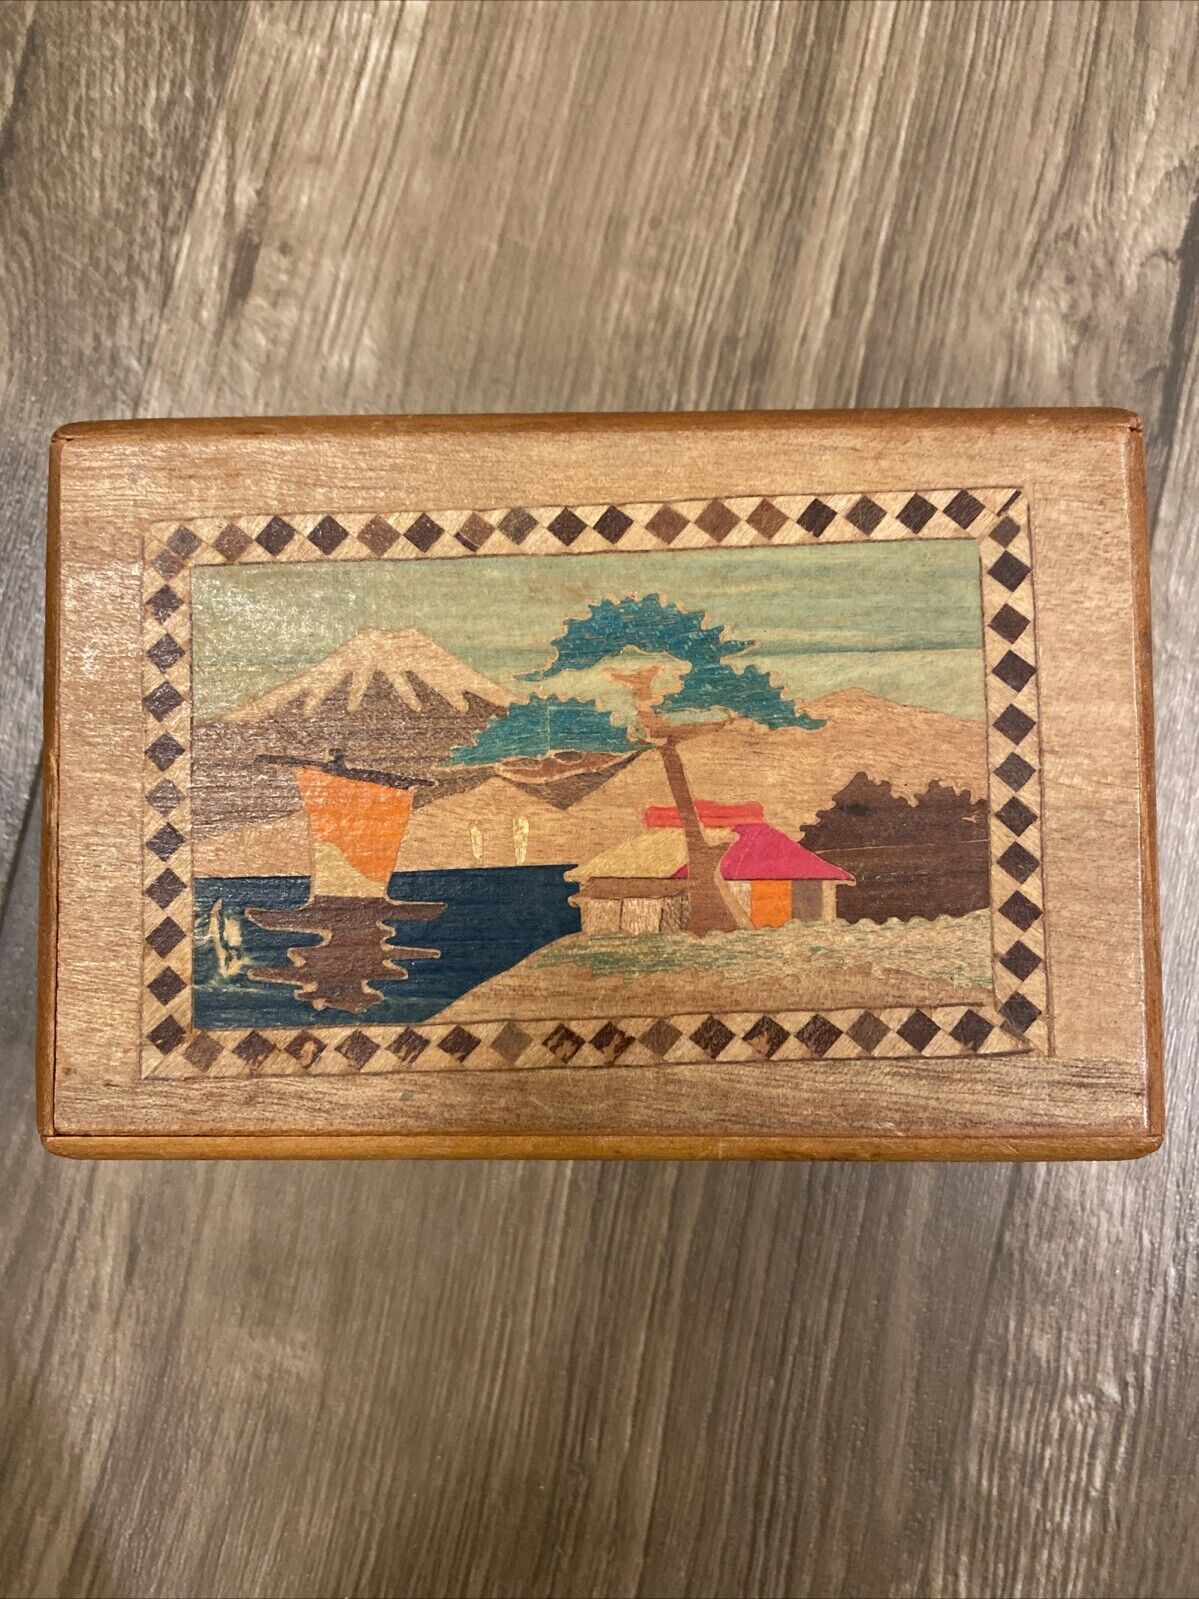 Japanese Inlaid Wooden Puzzle Box Mt. Fuji Scene Floral Marquetry Japan VTG